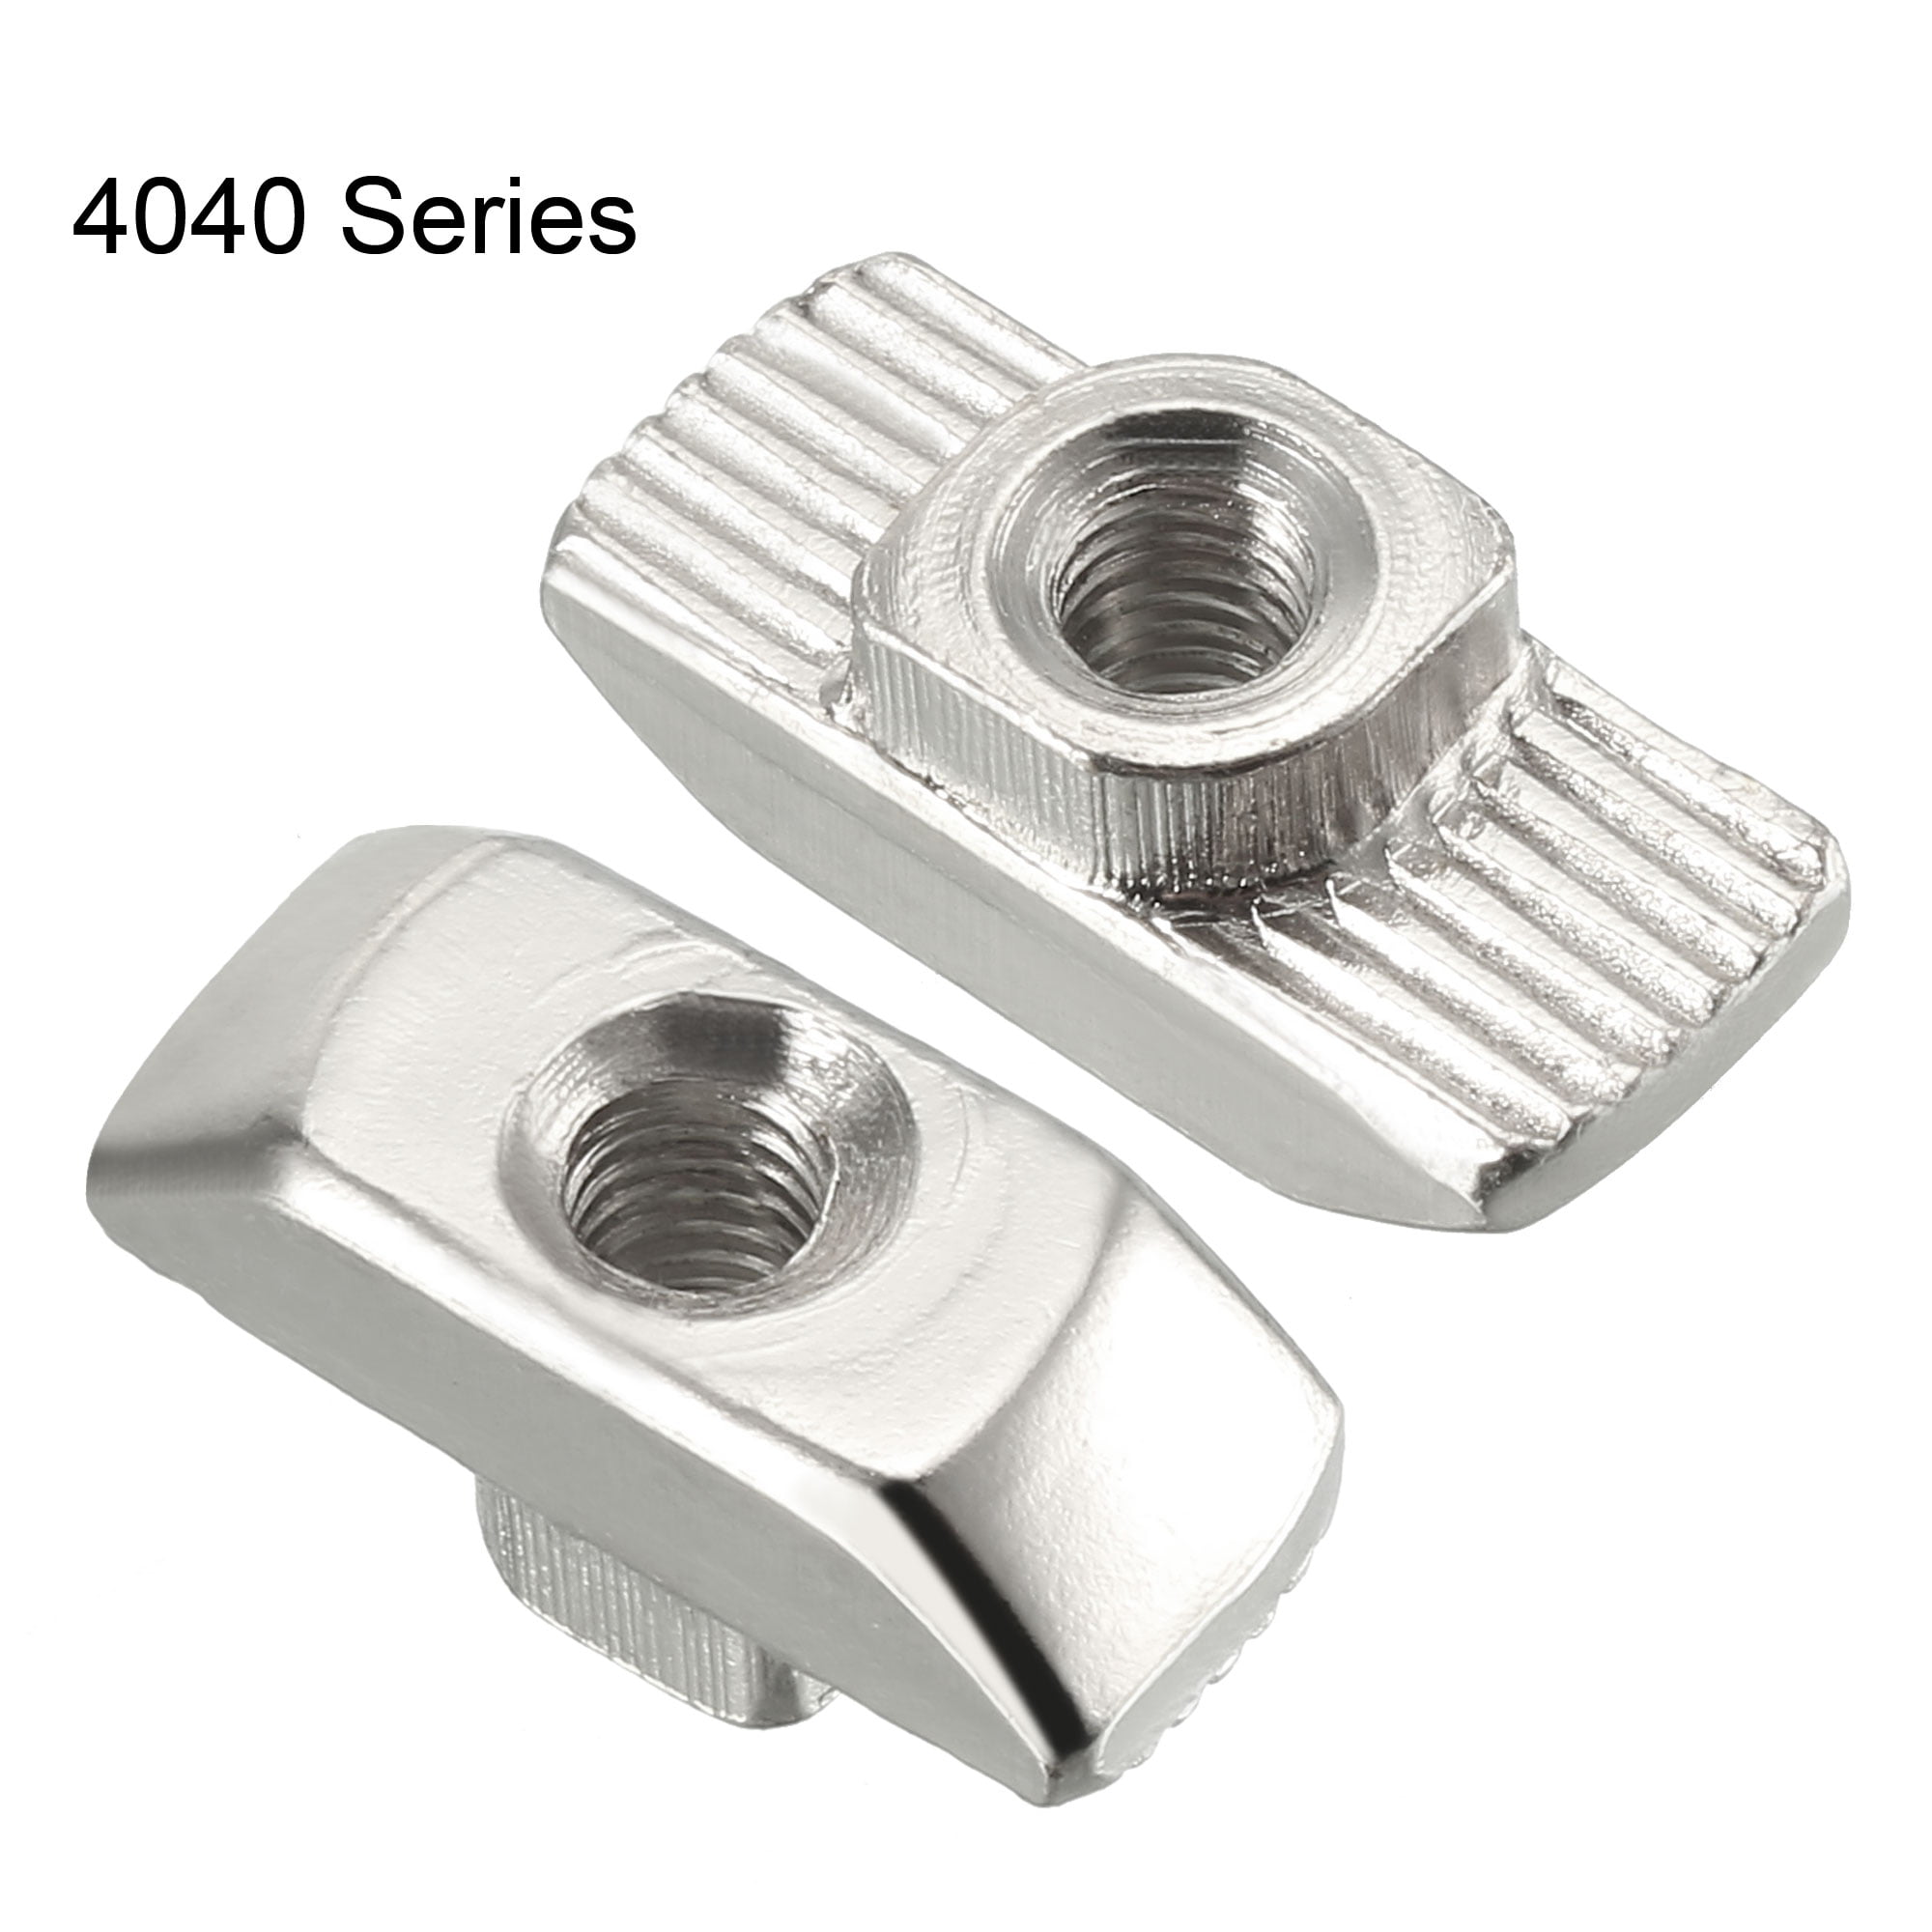 Drop In T-Nut M4 Thread For T-slot aluminum extrusion 15.5x7.8x5.5mm Pack of 20 